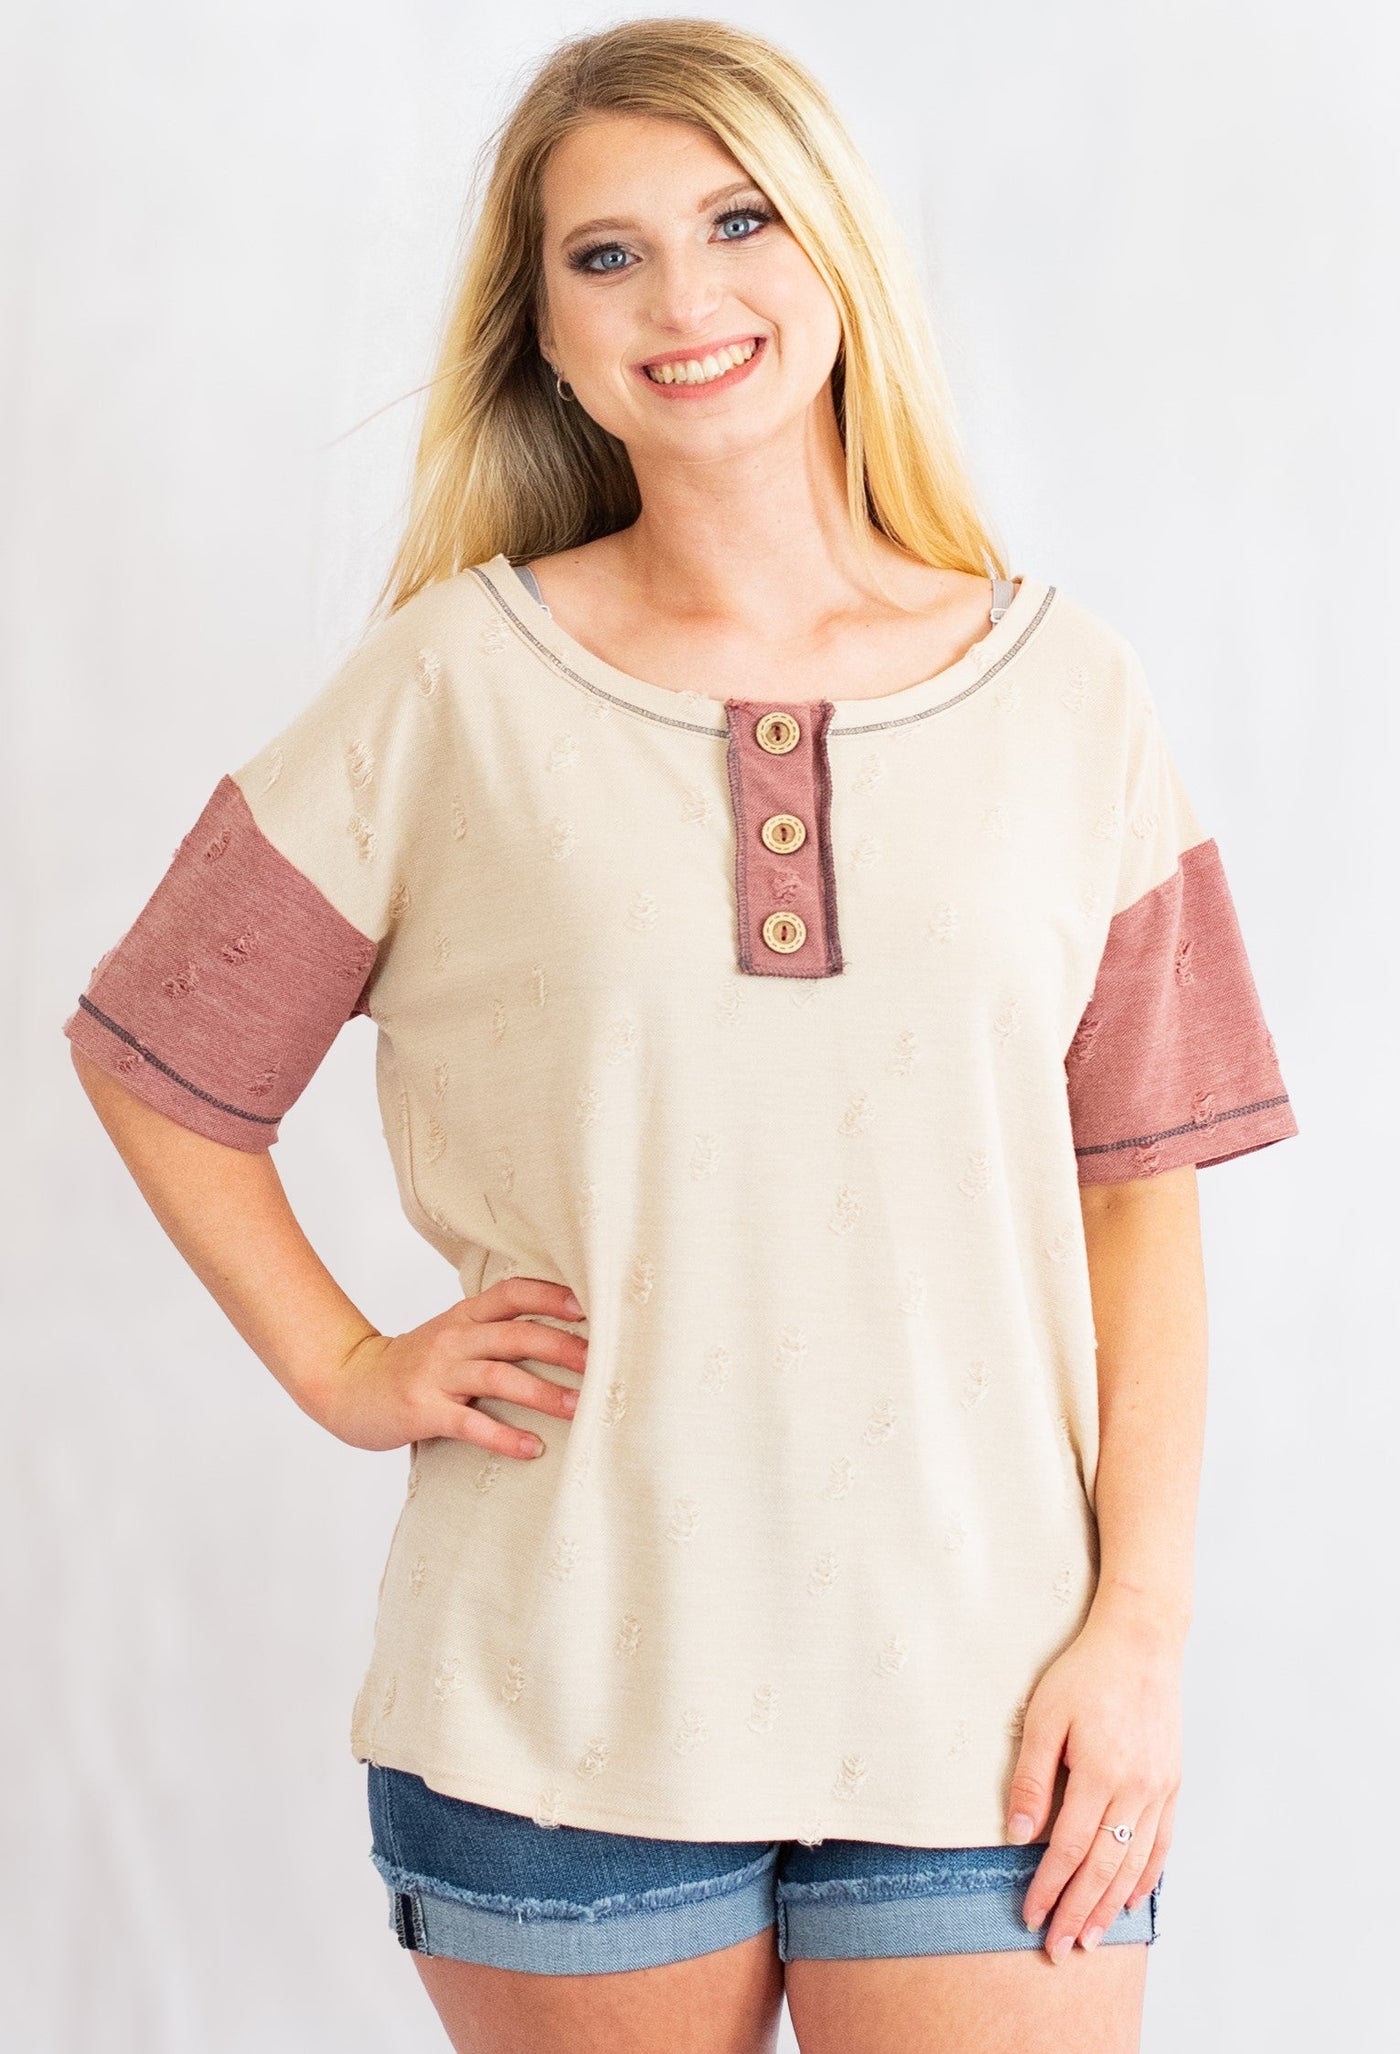 Distressed Knit Colorblock Short Sleeve Top by BiBi Clothing